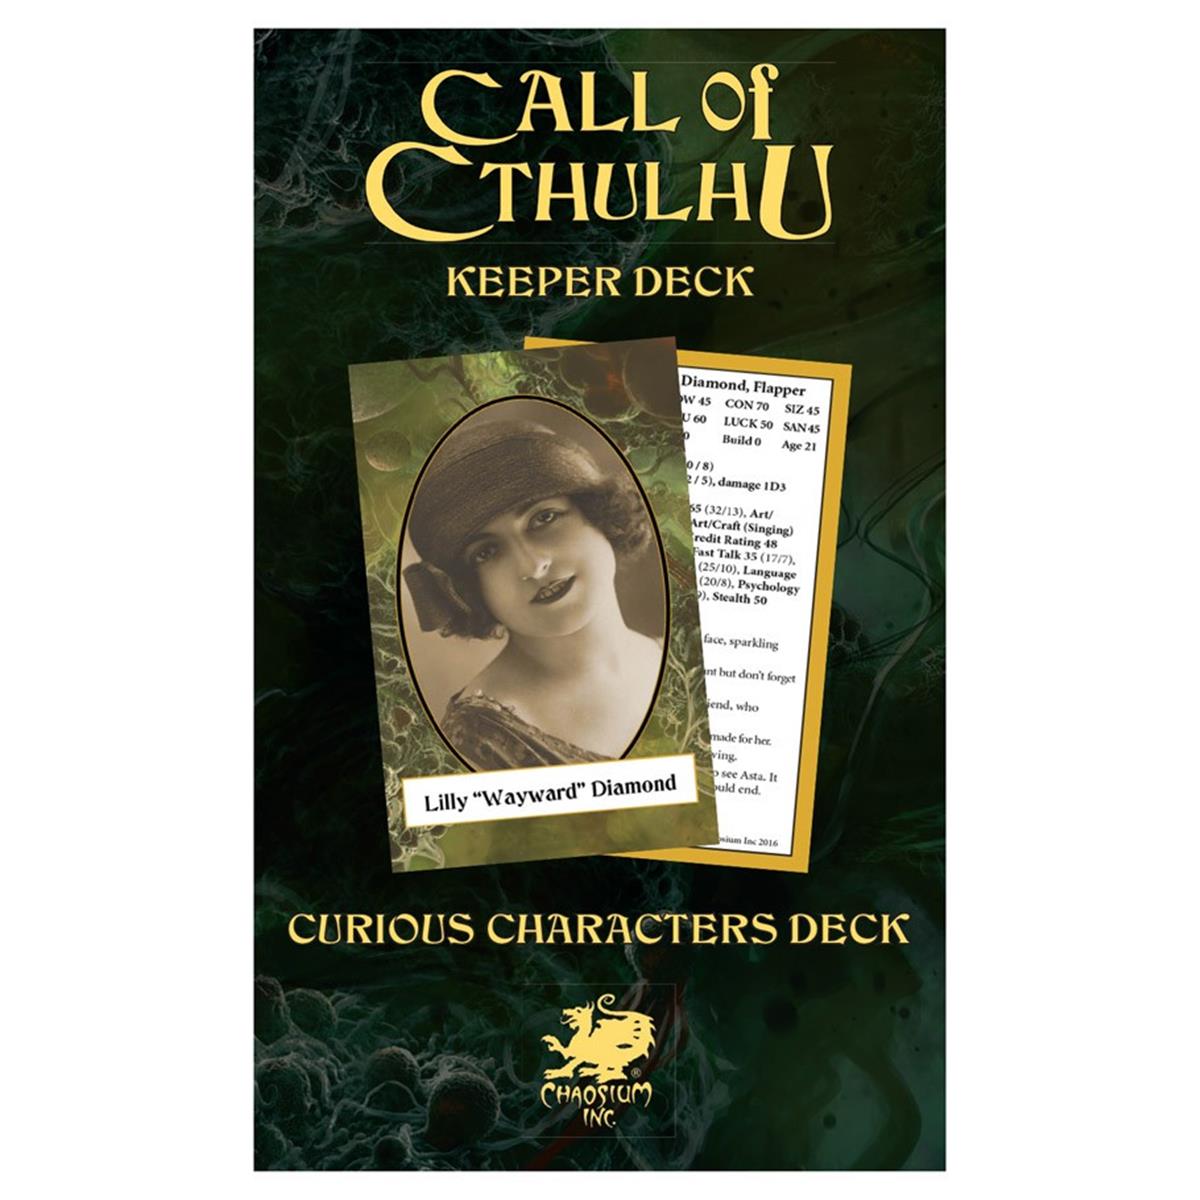 ISBN 9781568821634 product image for CAO23140 Call of Cthulhu Keeper Deck - 7th Edition | upcitemdb.com